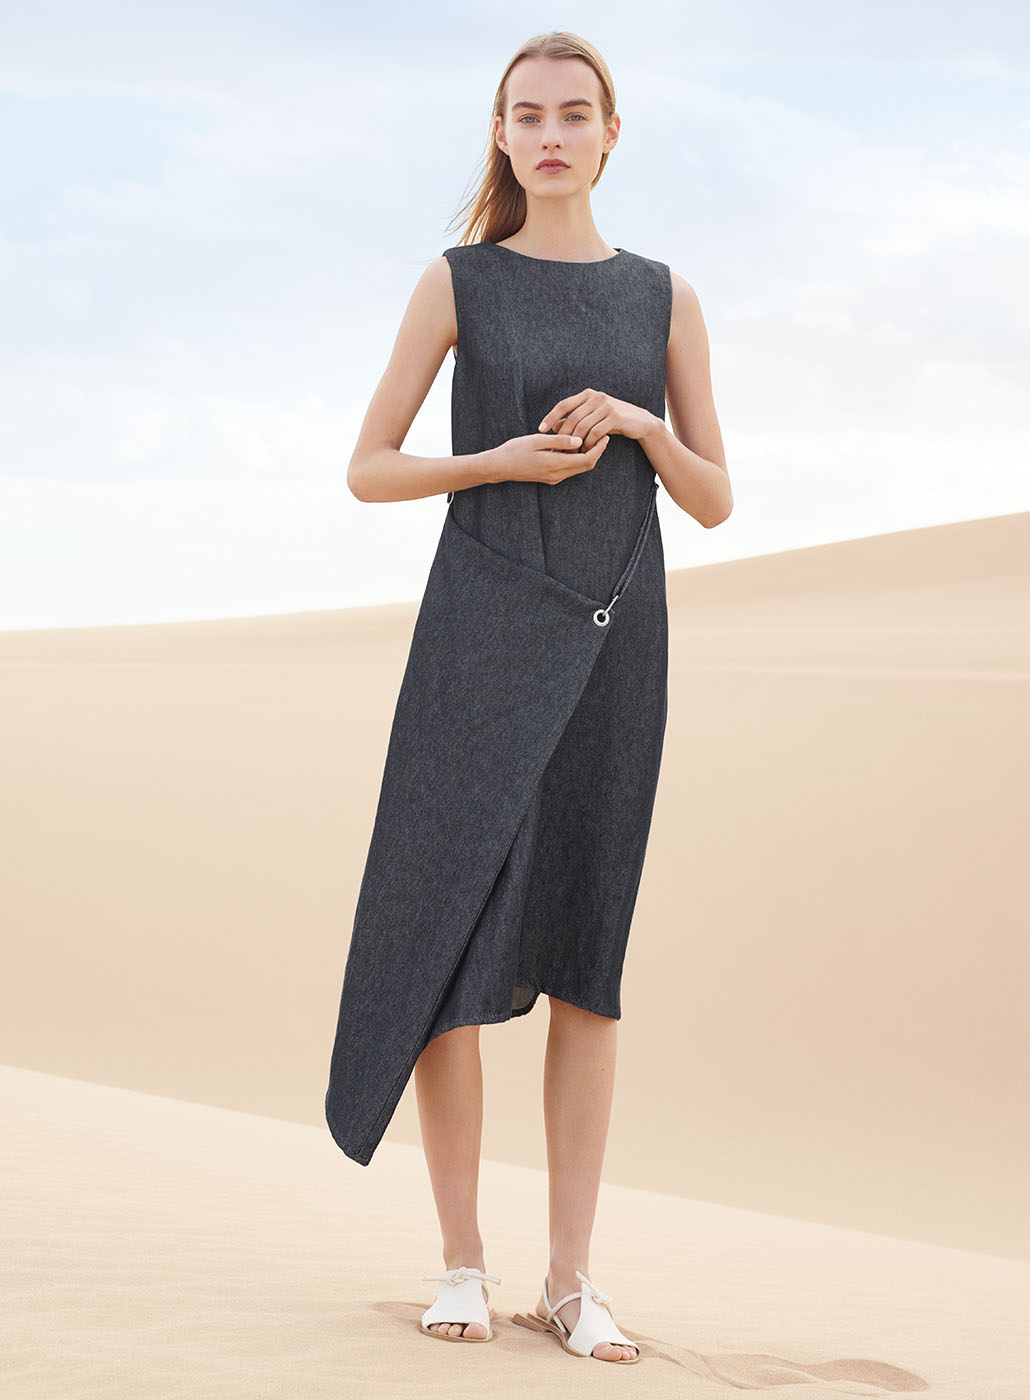 COS summer campaign | minimalistic fashion shooting in the desert